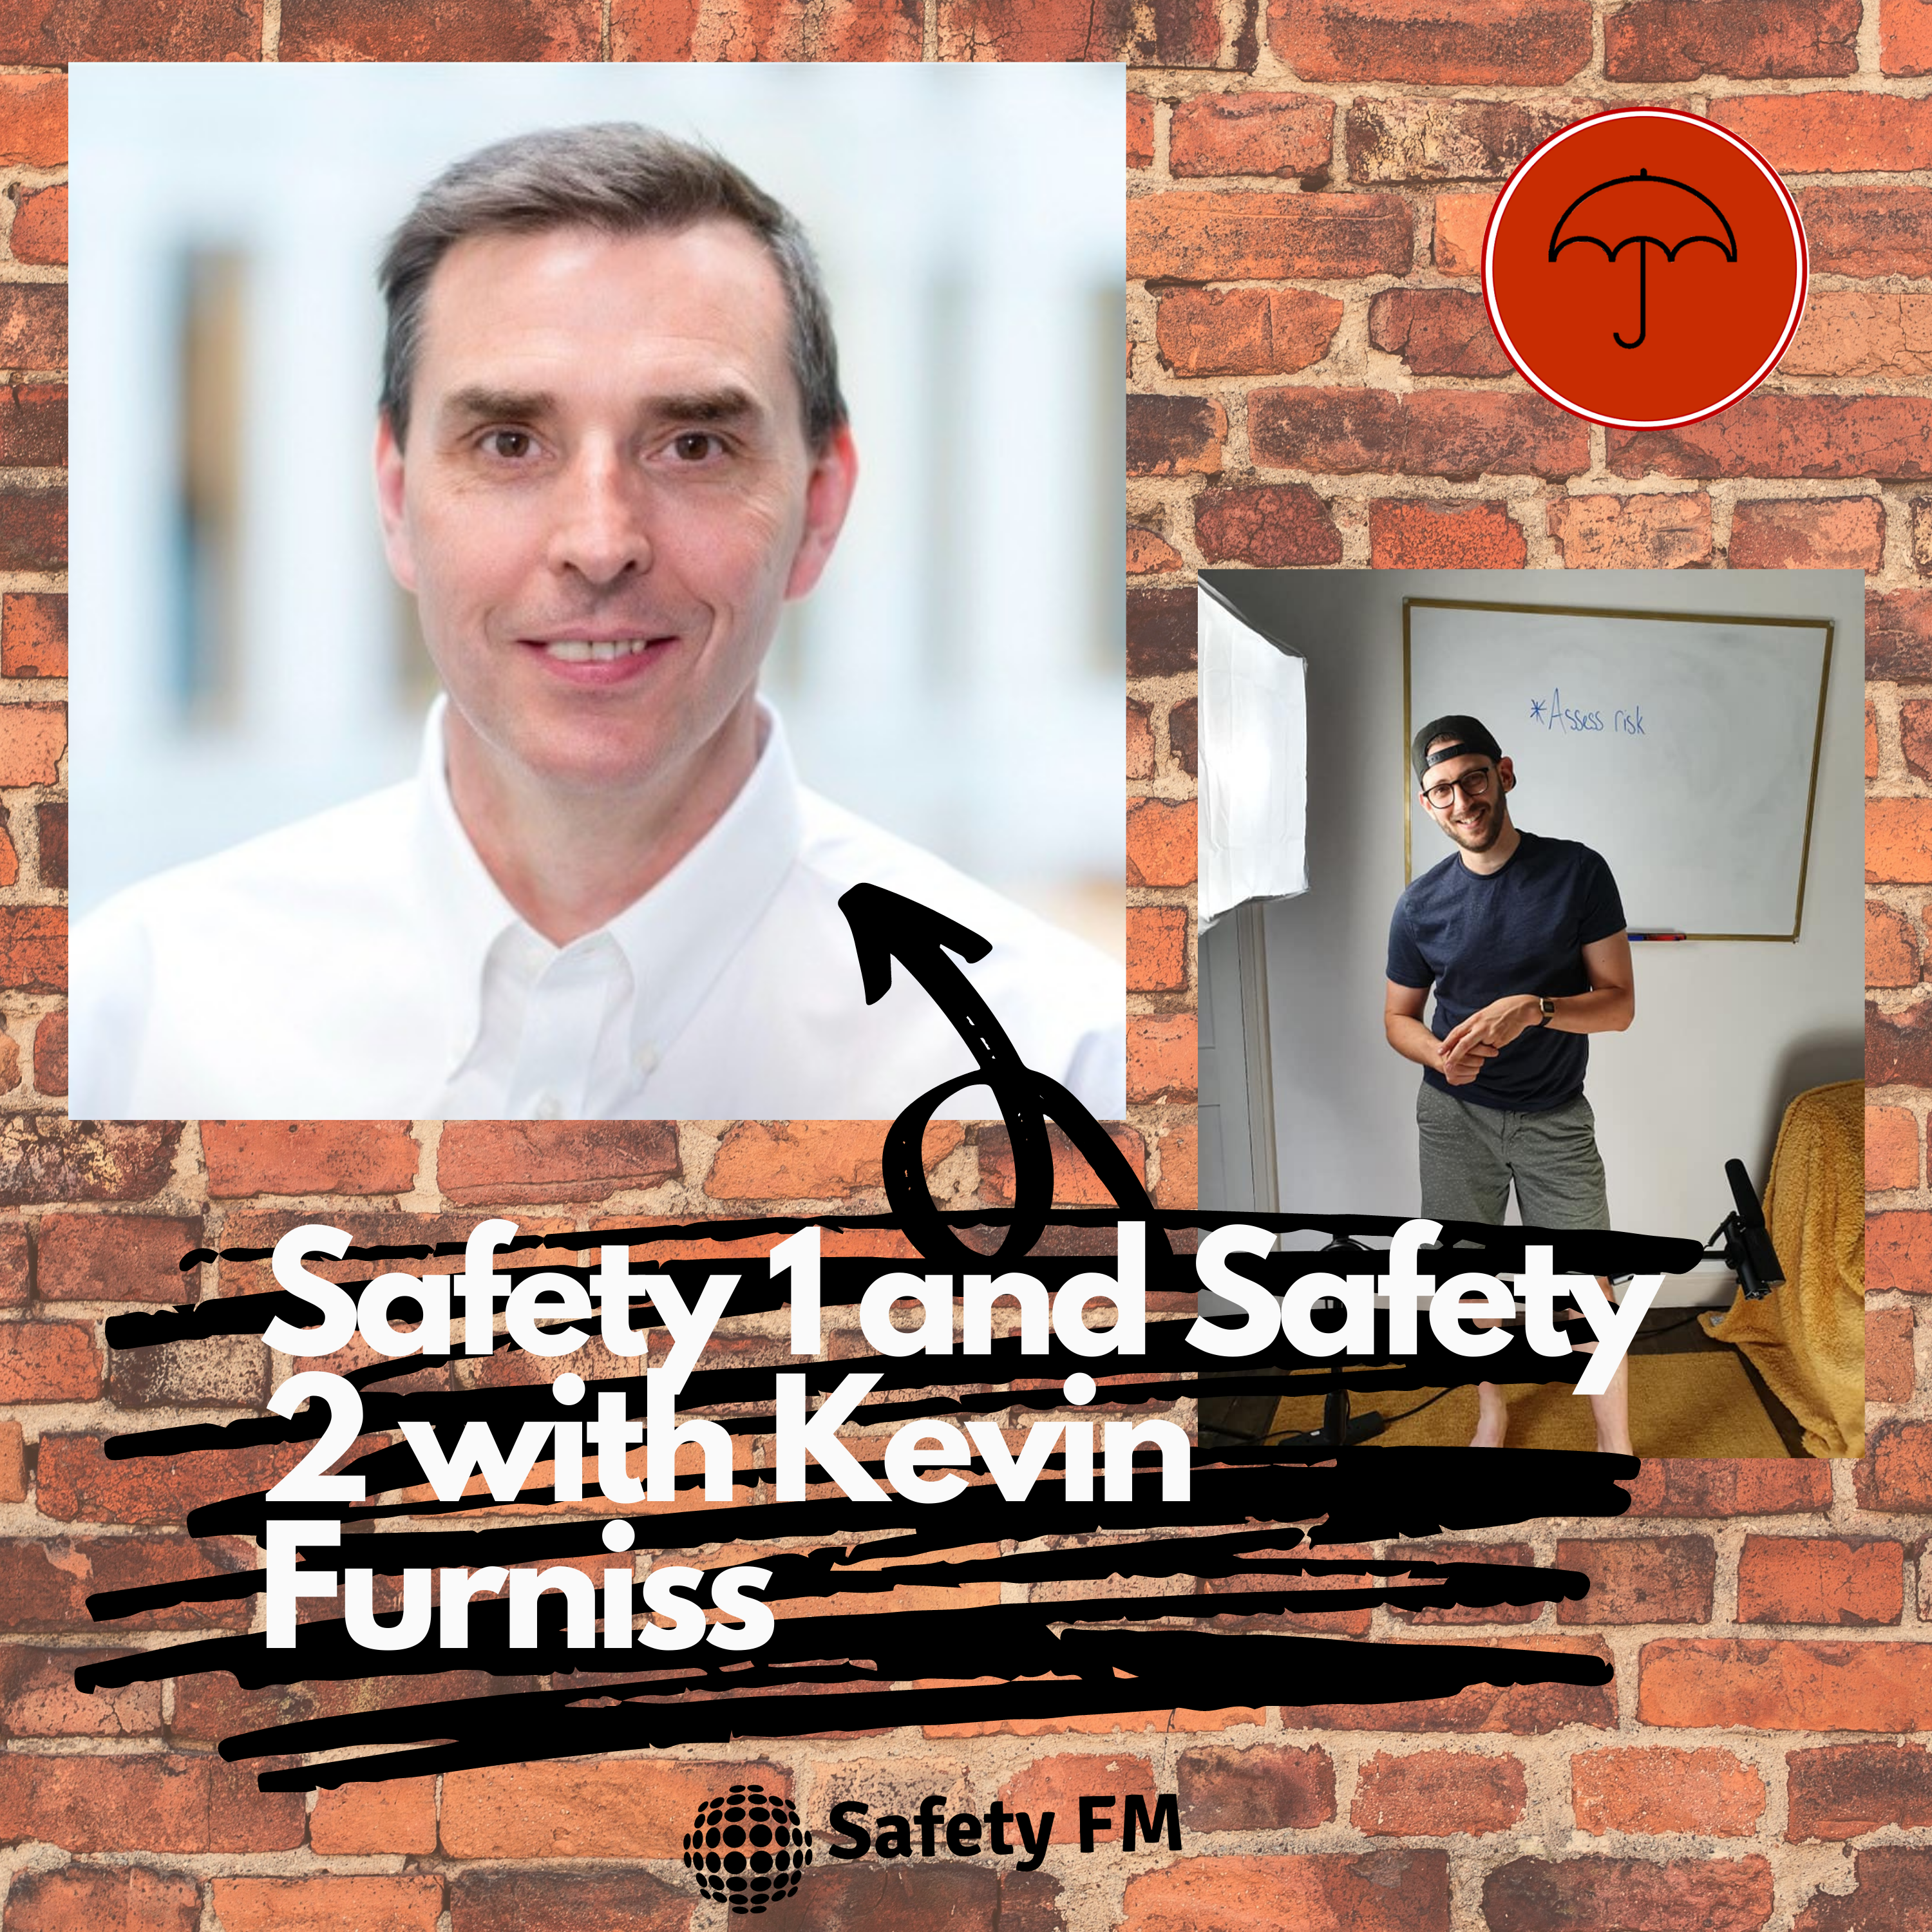 Safety 1 and Safety 2 with Kevin Furniss